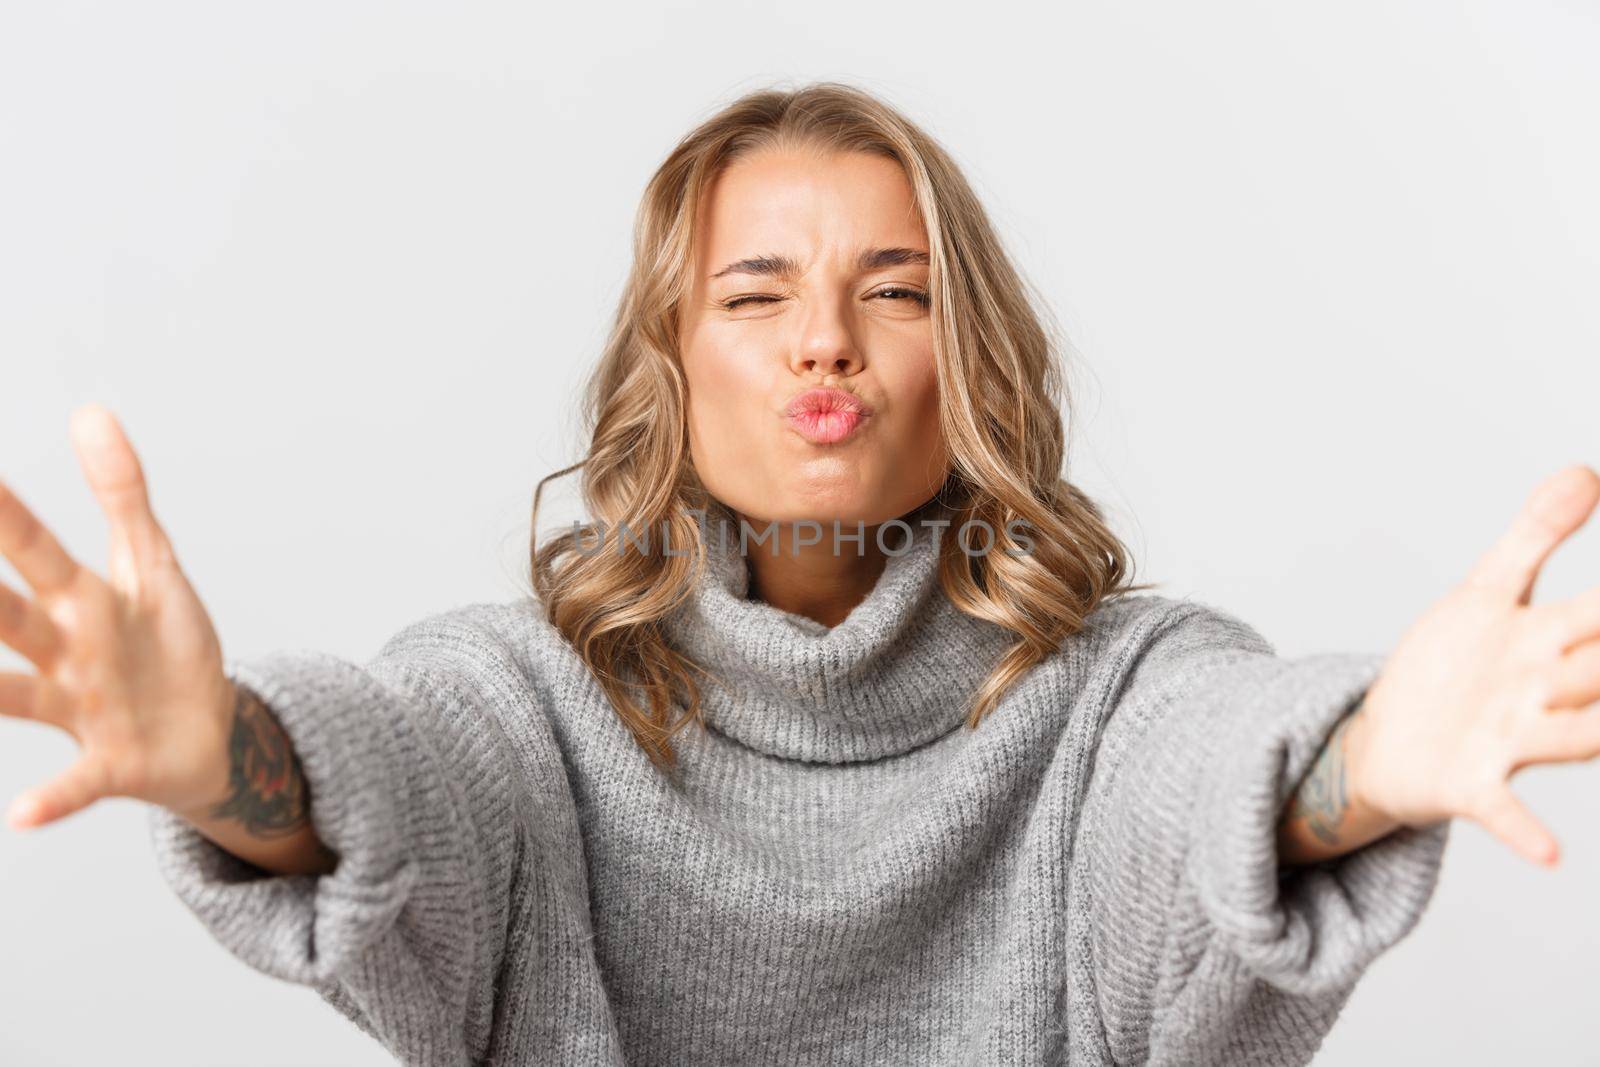 Close-up of happy attractive blond girl smiling, stretching hands forward for hug, reaching for something with kissing face, standing over white background.